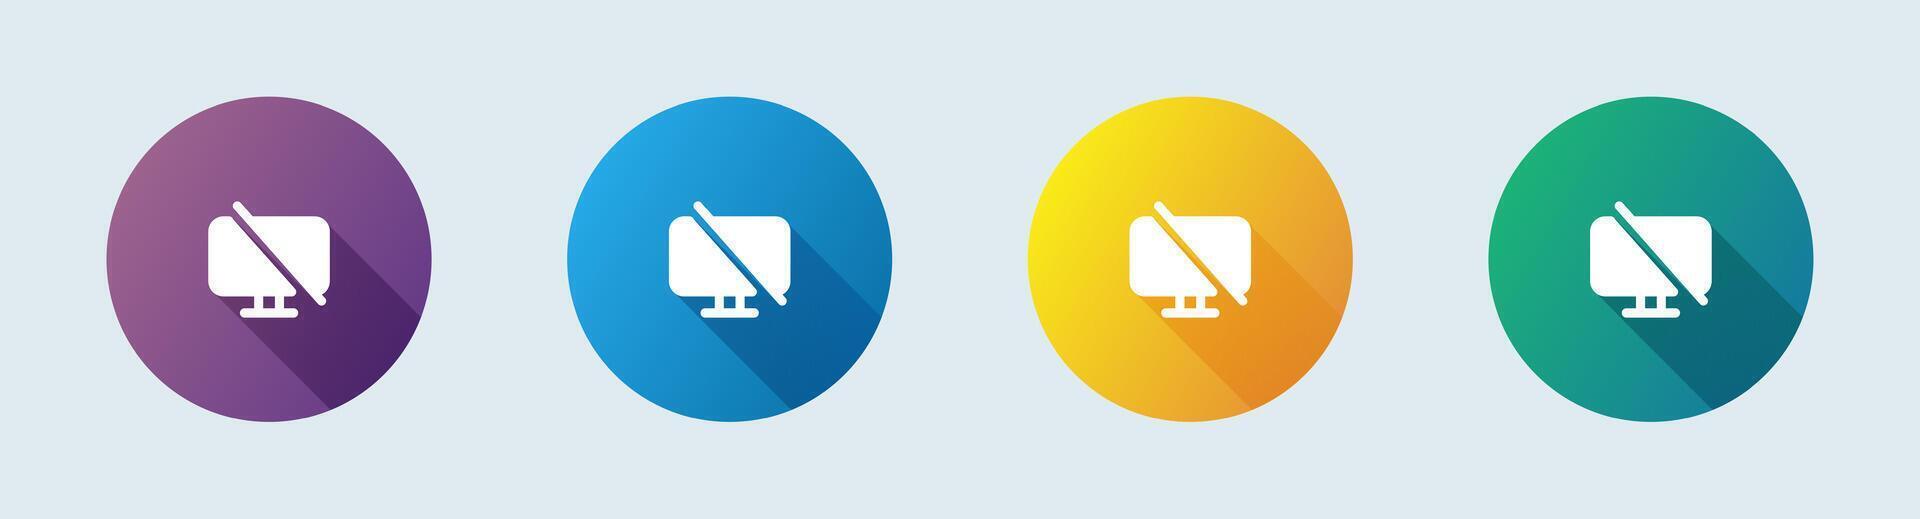 No display solid icon in flat design style. Monitor signs vector illustration.